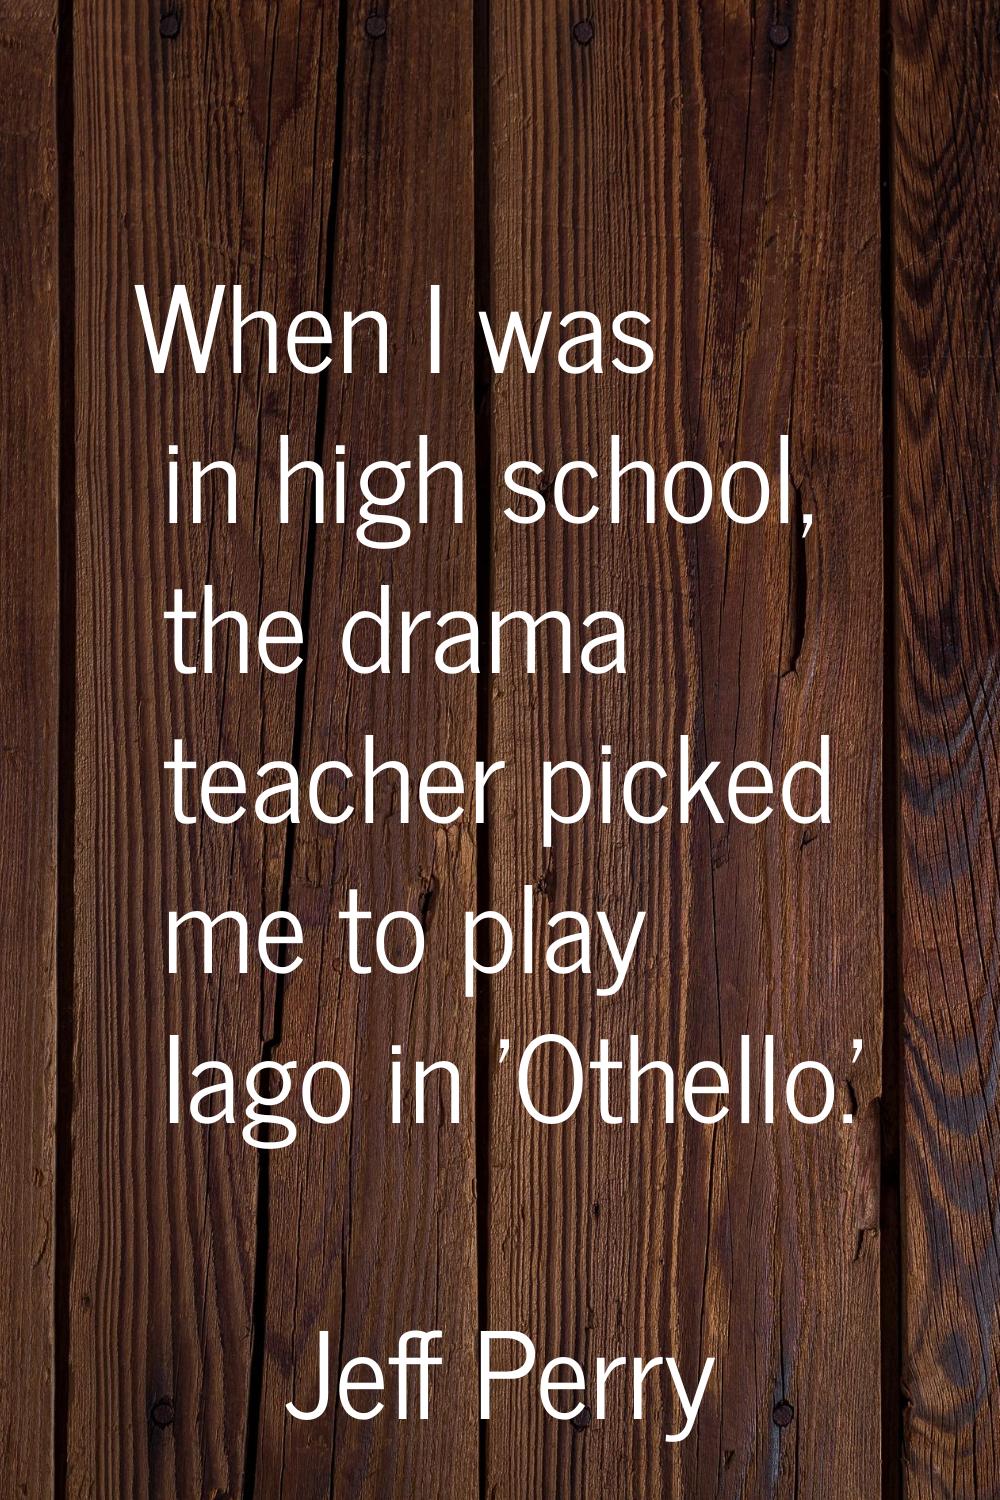 When I was in high school, the drama teacher picked me to play Iago in 'Othello.'